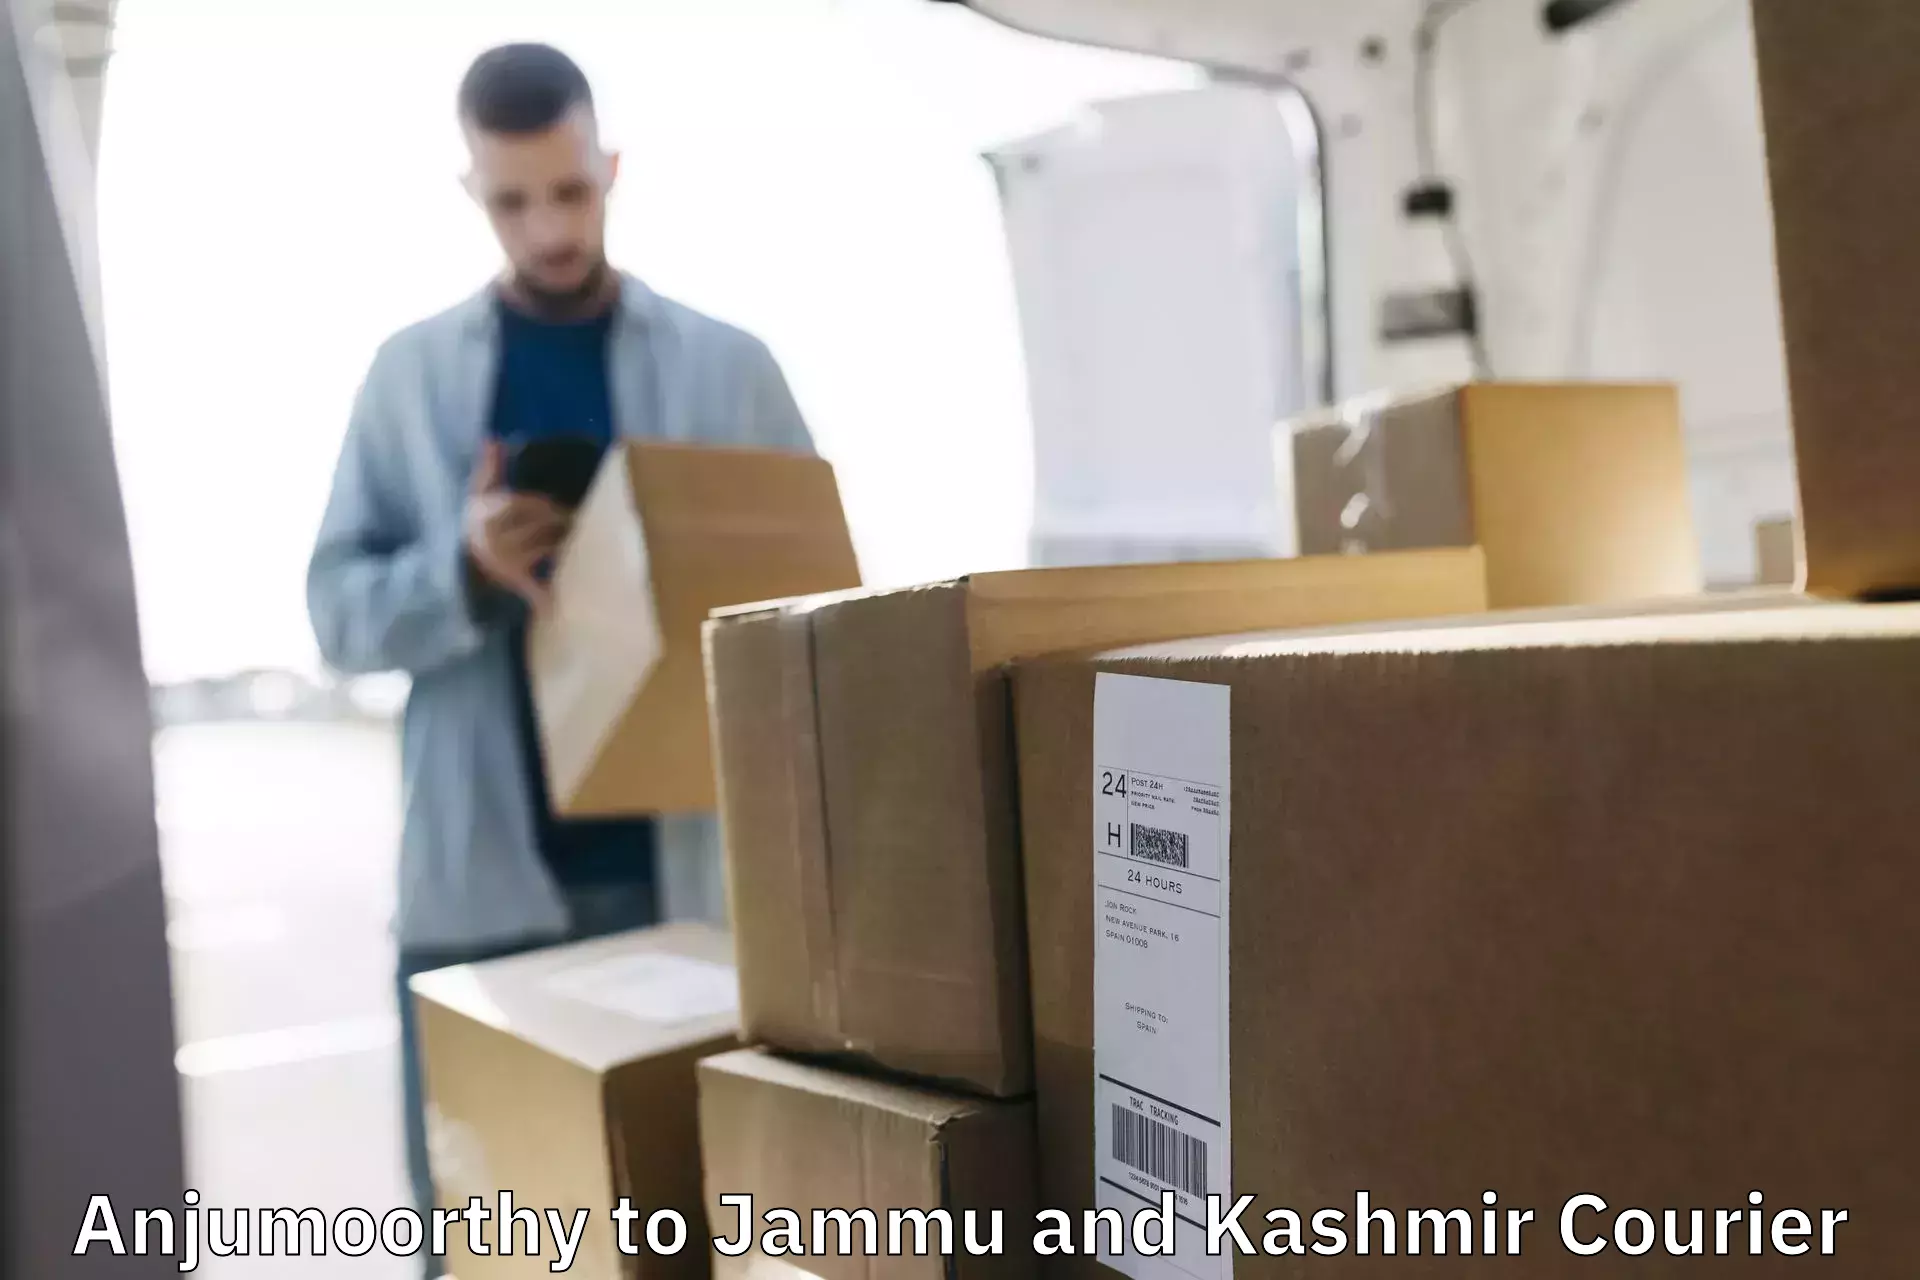 Remote area delivery in Anjumoorthy to Jammu and Kashmir